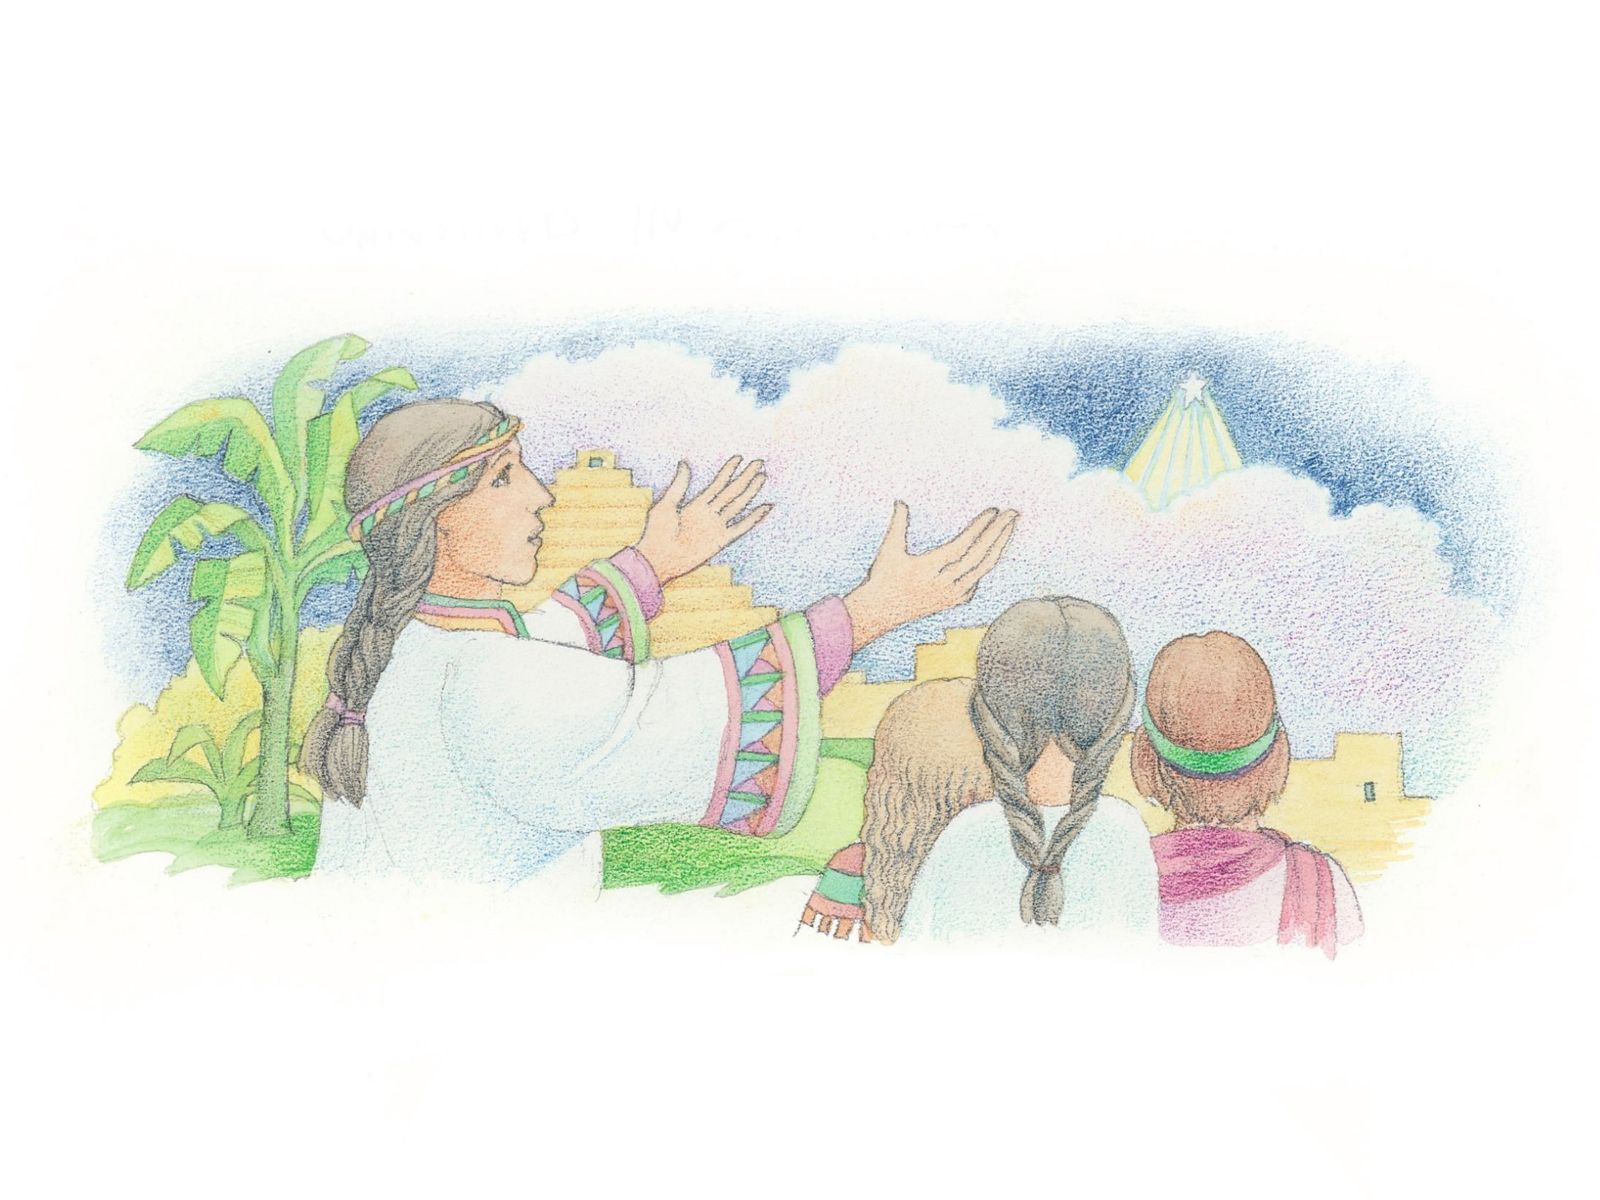 Samuel telling the Book of Mormon people of the birth of Jesus. From the Children’s Songbook, page 36, “Samuel Tells of the Baby Jesus”; watercolor illustration by Phyllis Luch.